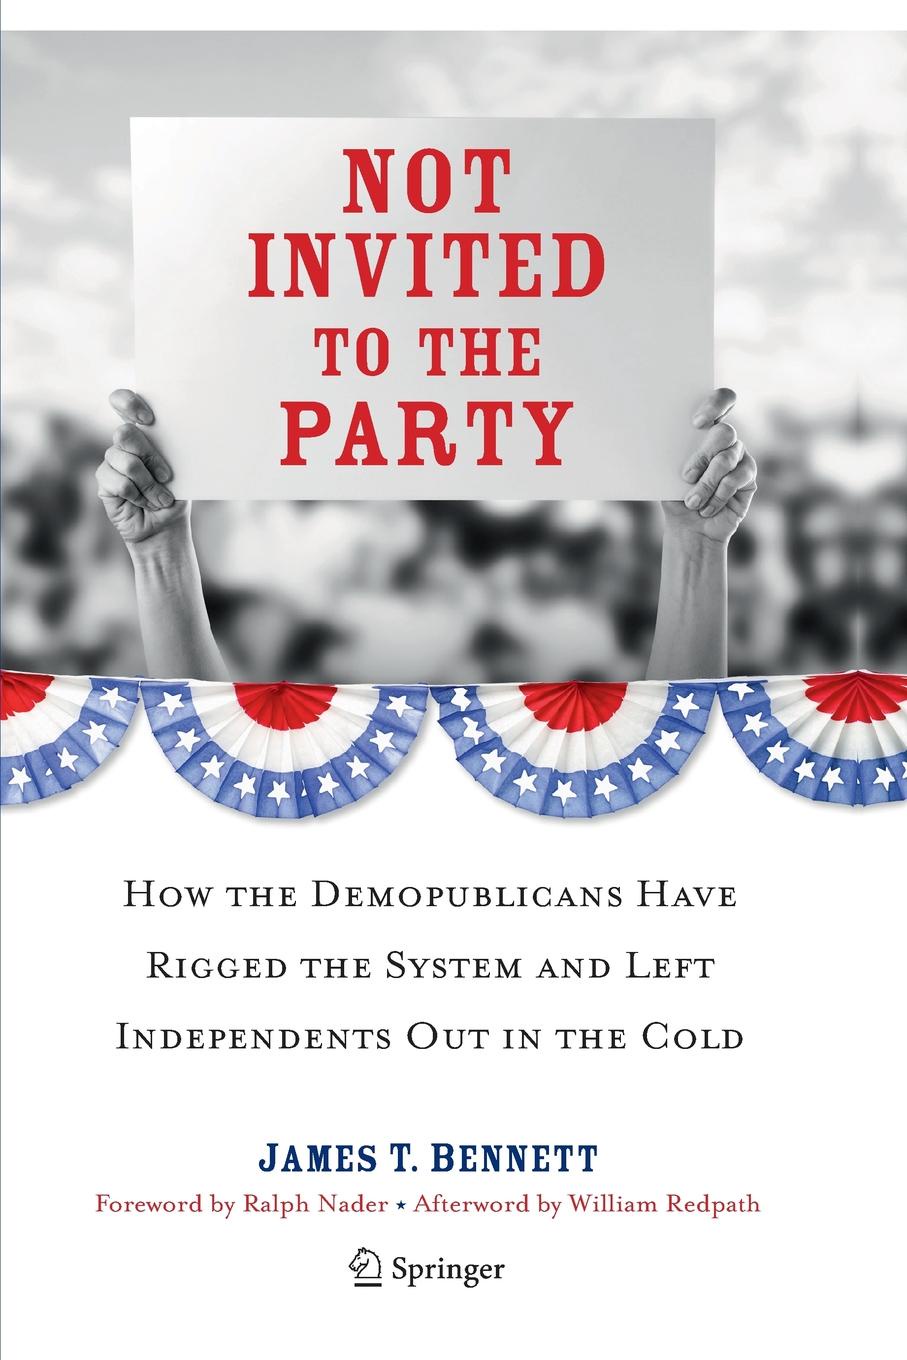 Not Invited to the Party. How the Demopublicans Have Rigged the System and Left Independents Out in the Cold